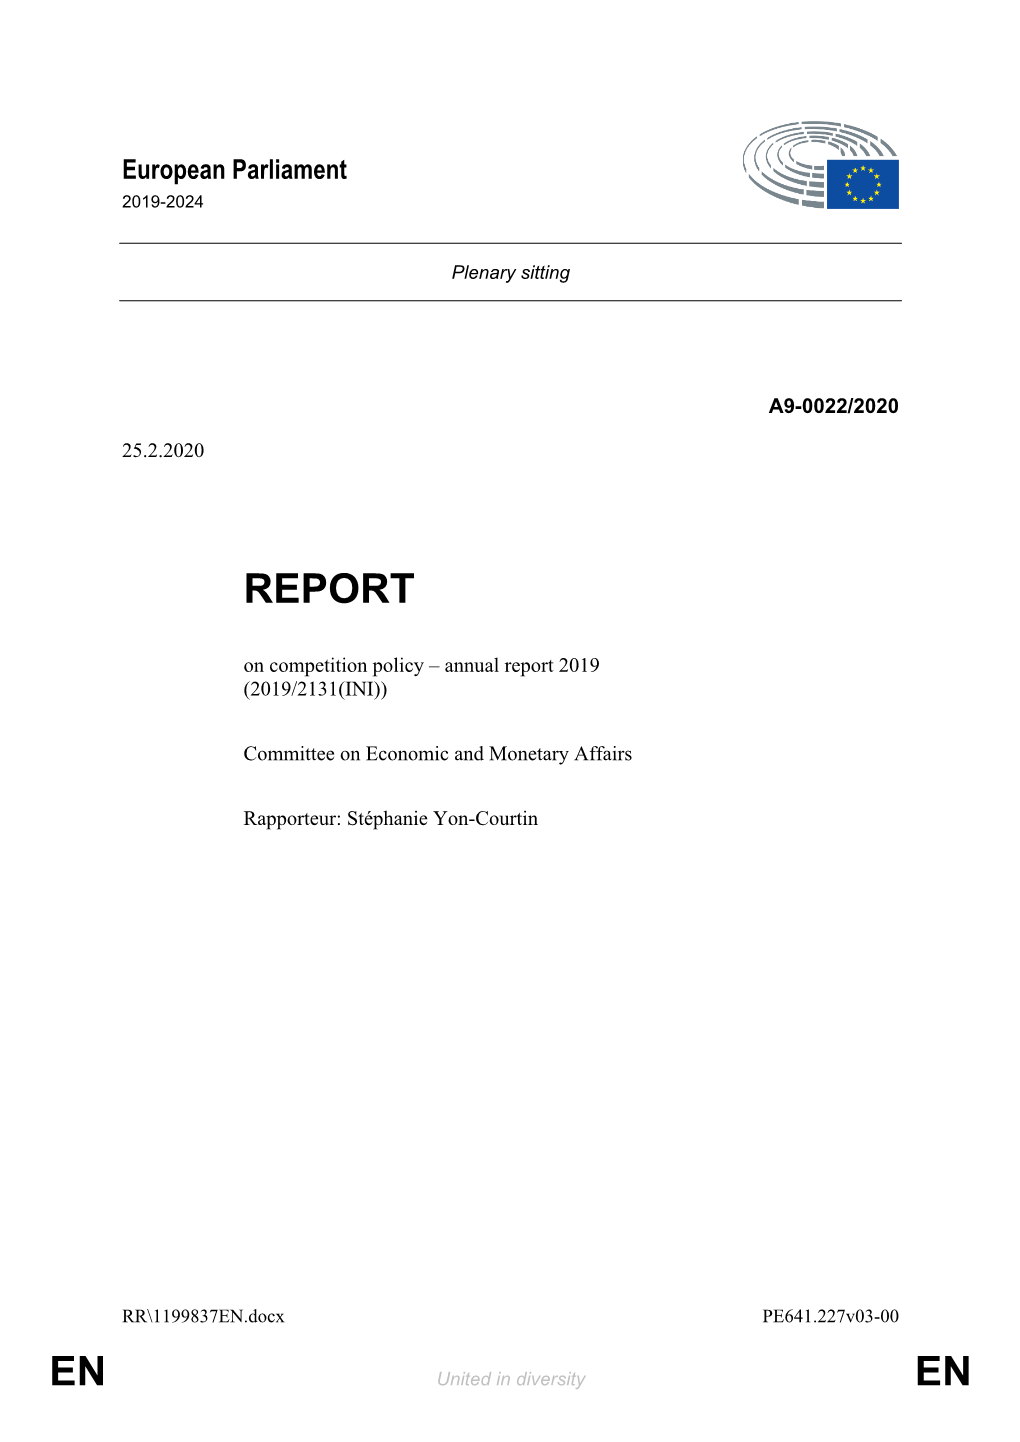 Competition Policy – Annual Report 2019 (2019/2131(INI))